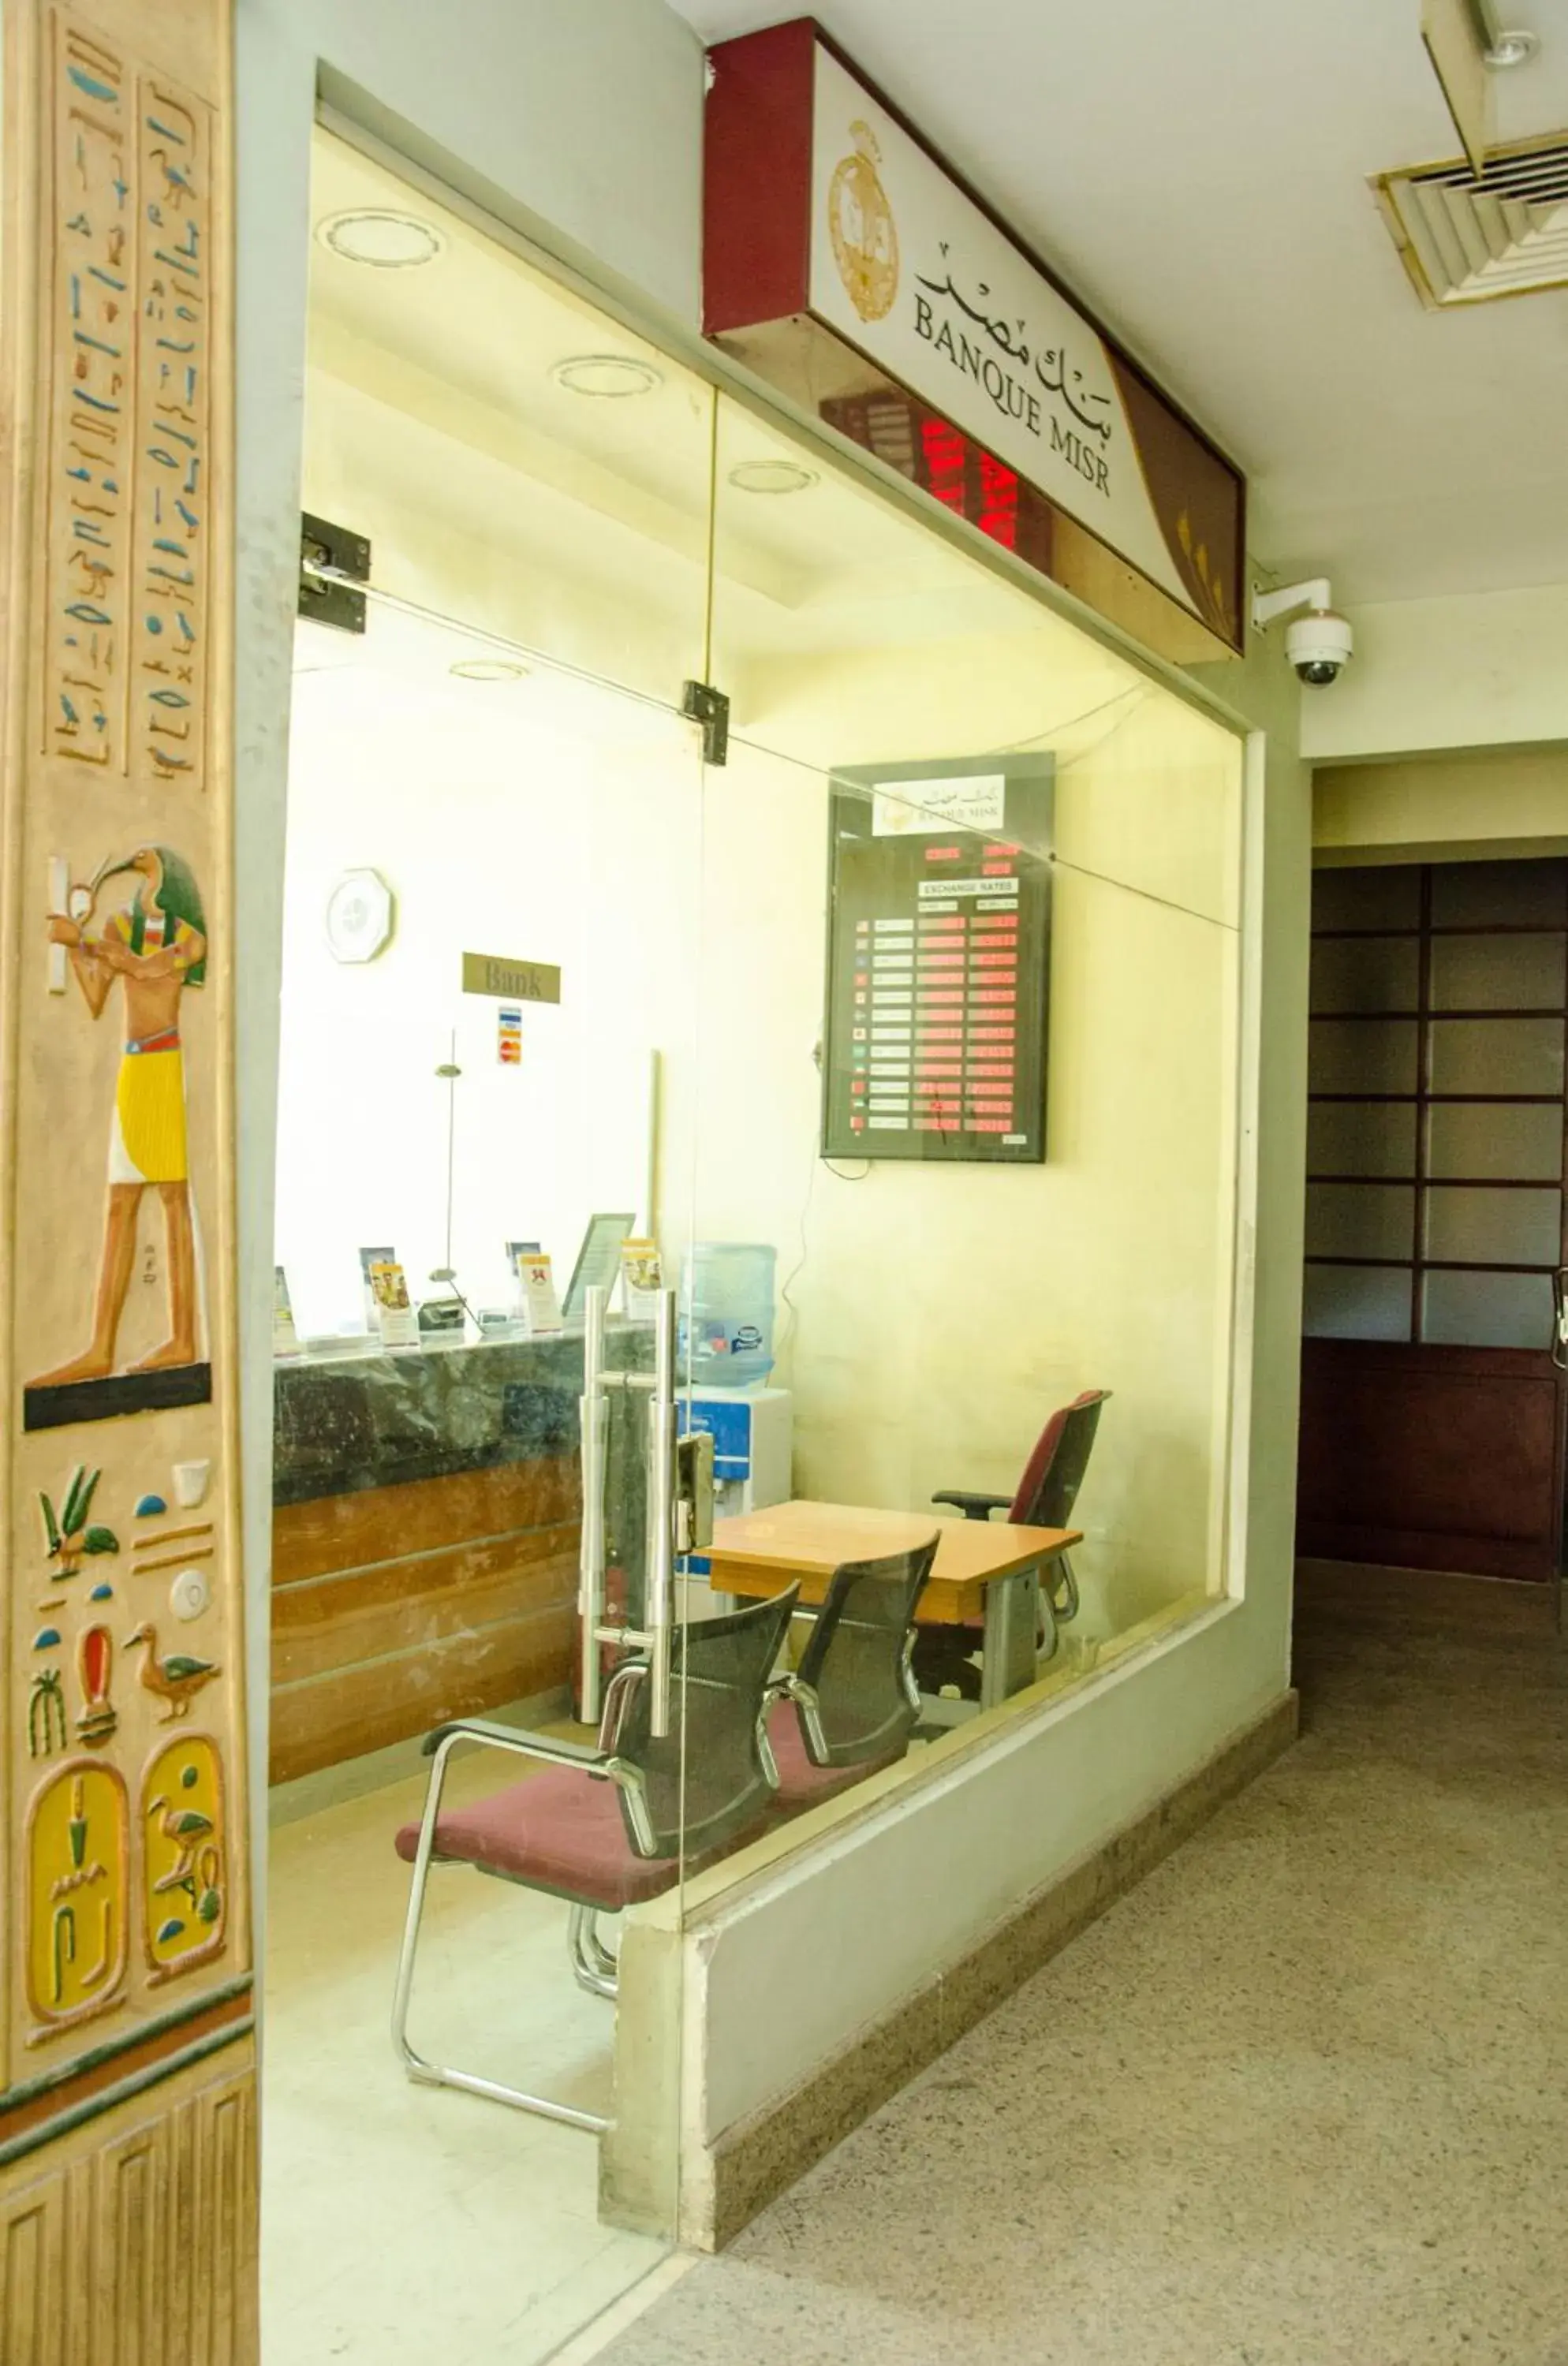 Area and facilities, Lobby/Reception in Grand Pyramids Hotel